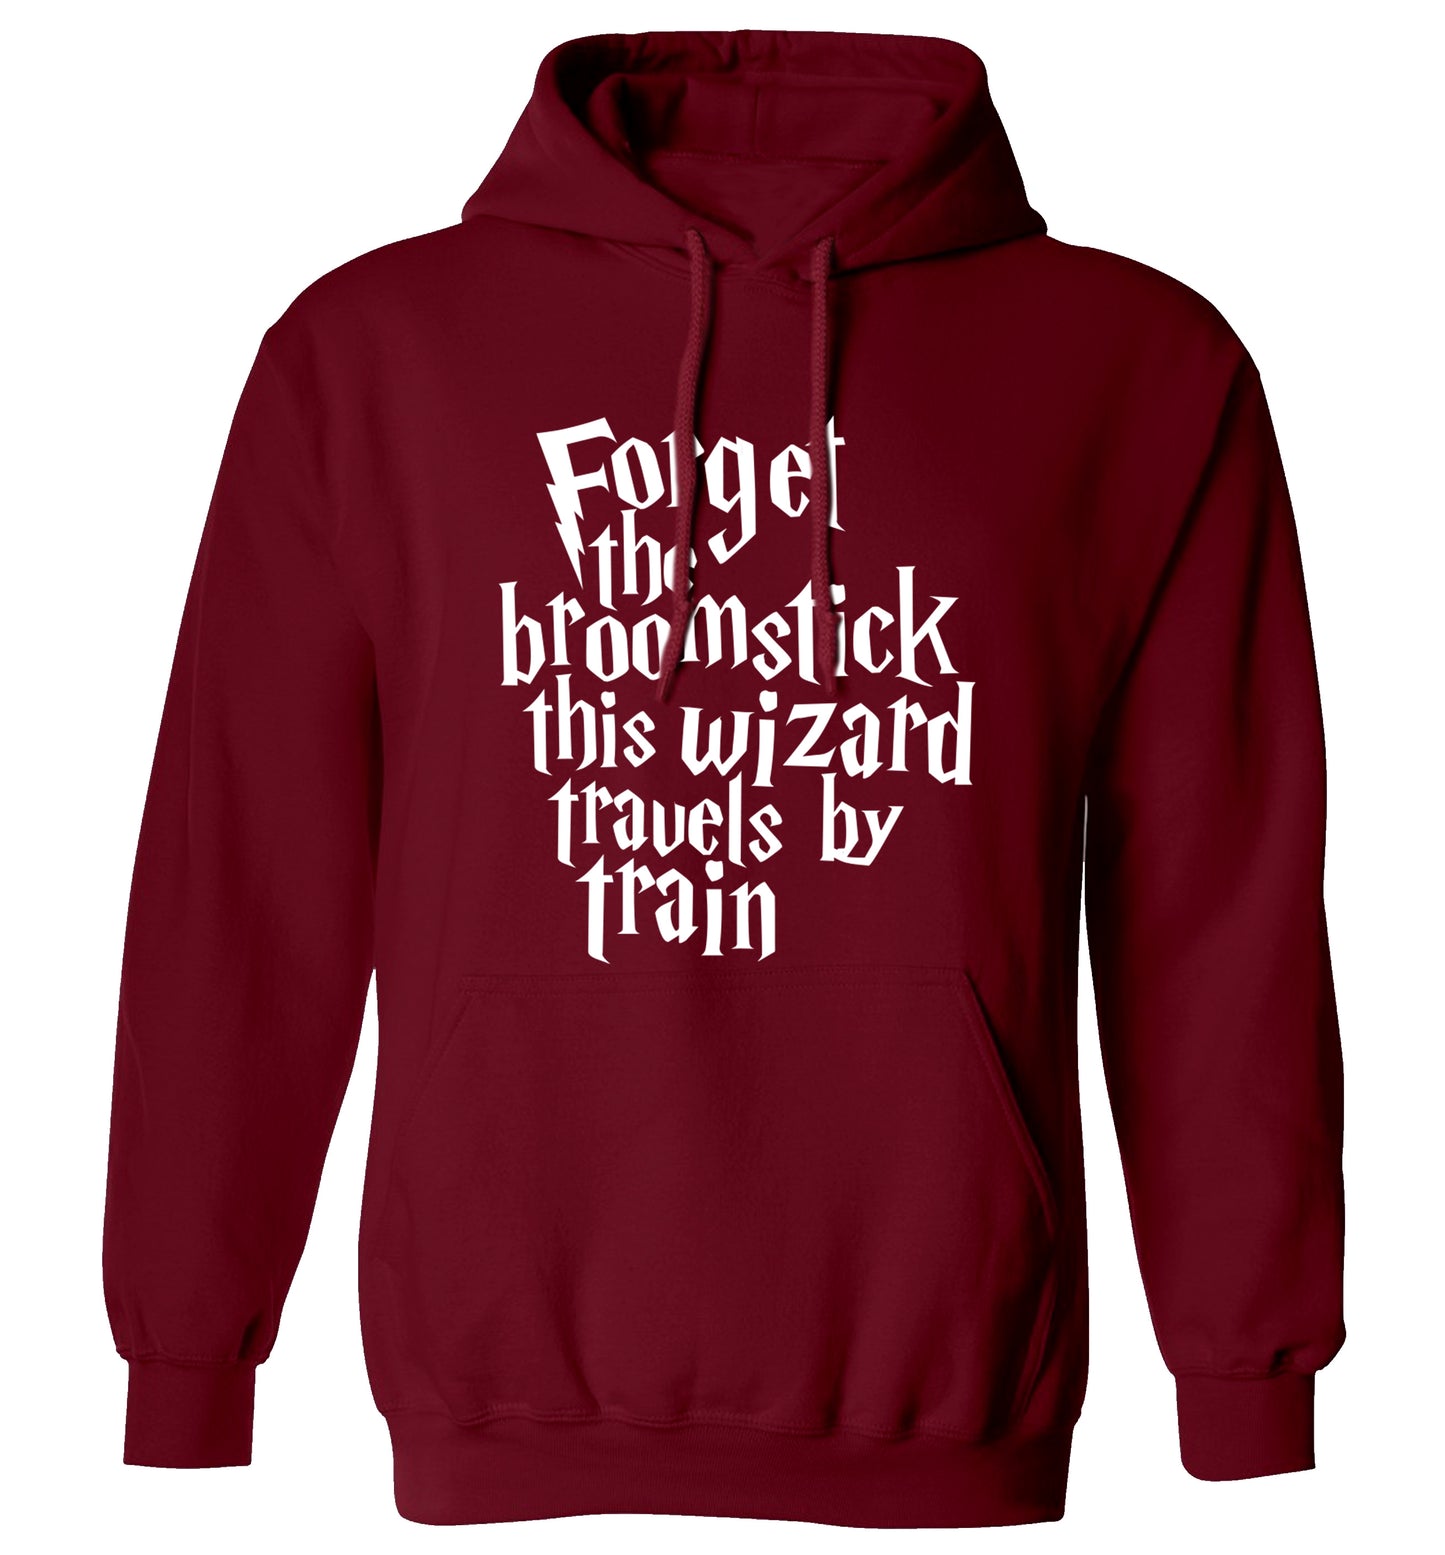 Forget the broomstick this wizard travels by train adults unisexmaroon hoodie 2XL